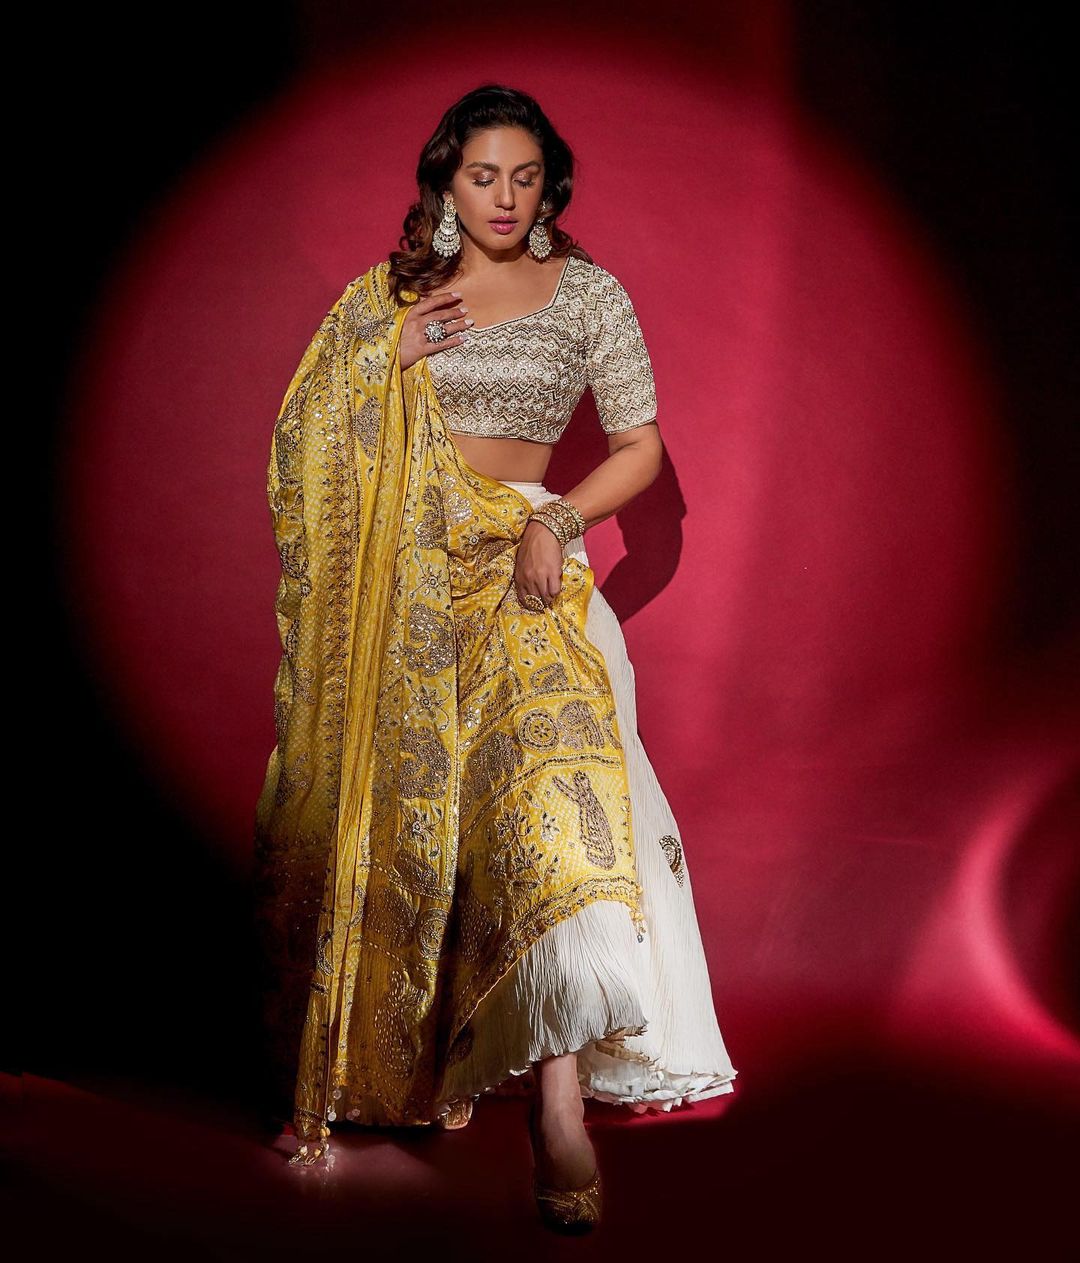 Huma Qureshi looks regal in a white and silver lehenga with yellow dupatta